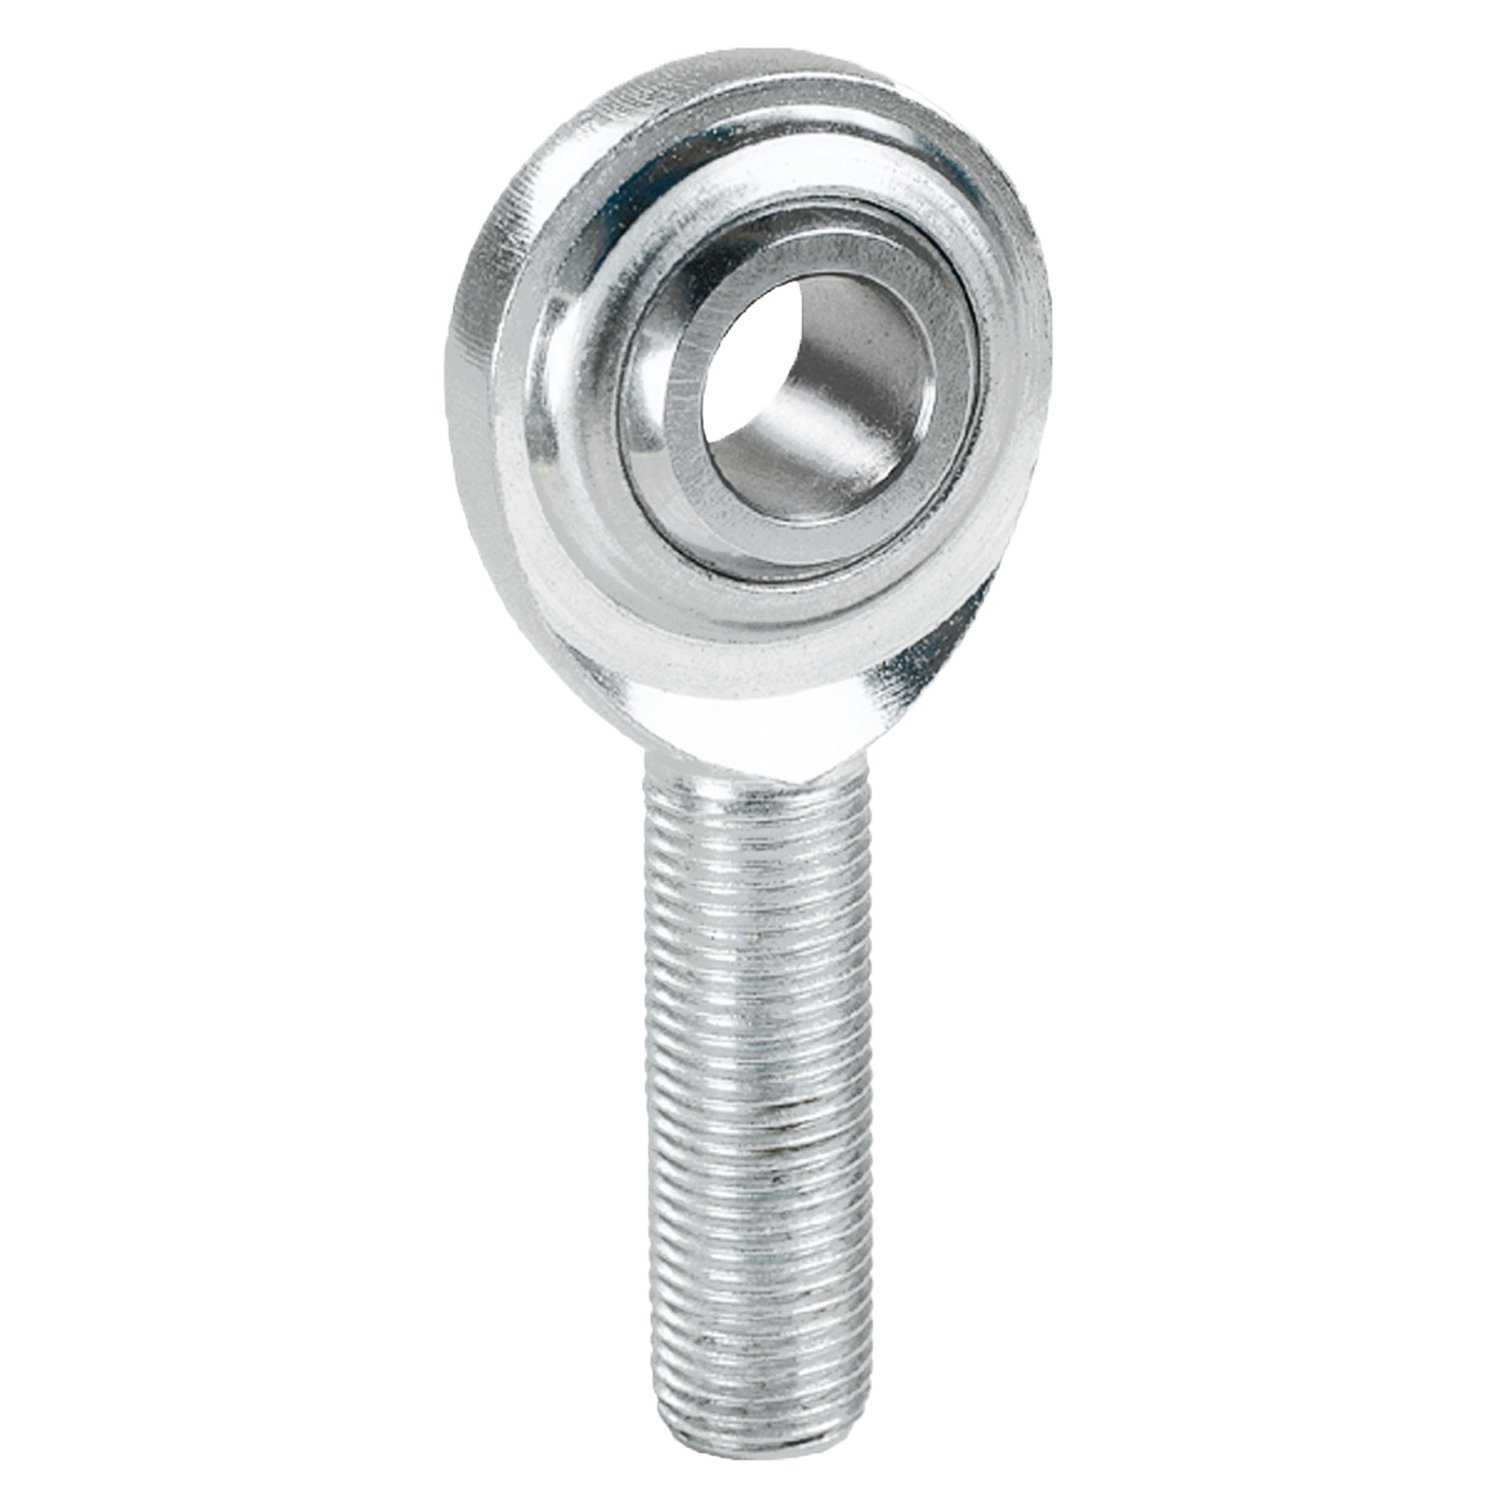 MGM-T Series Stainless Steel Rod End Hole I.D.: 8 mm